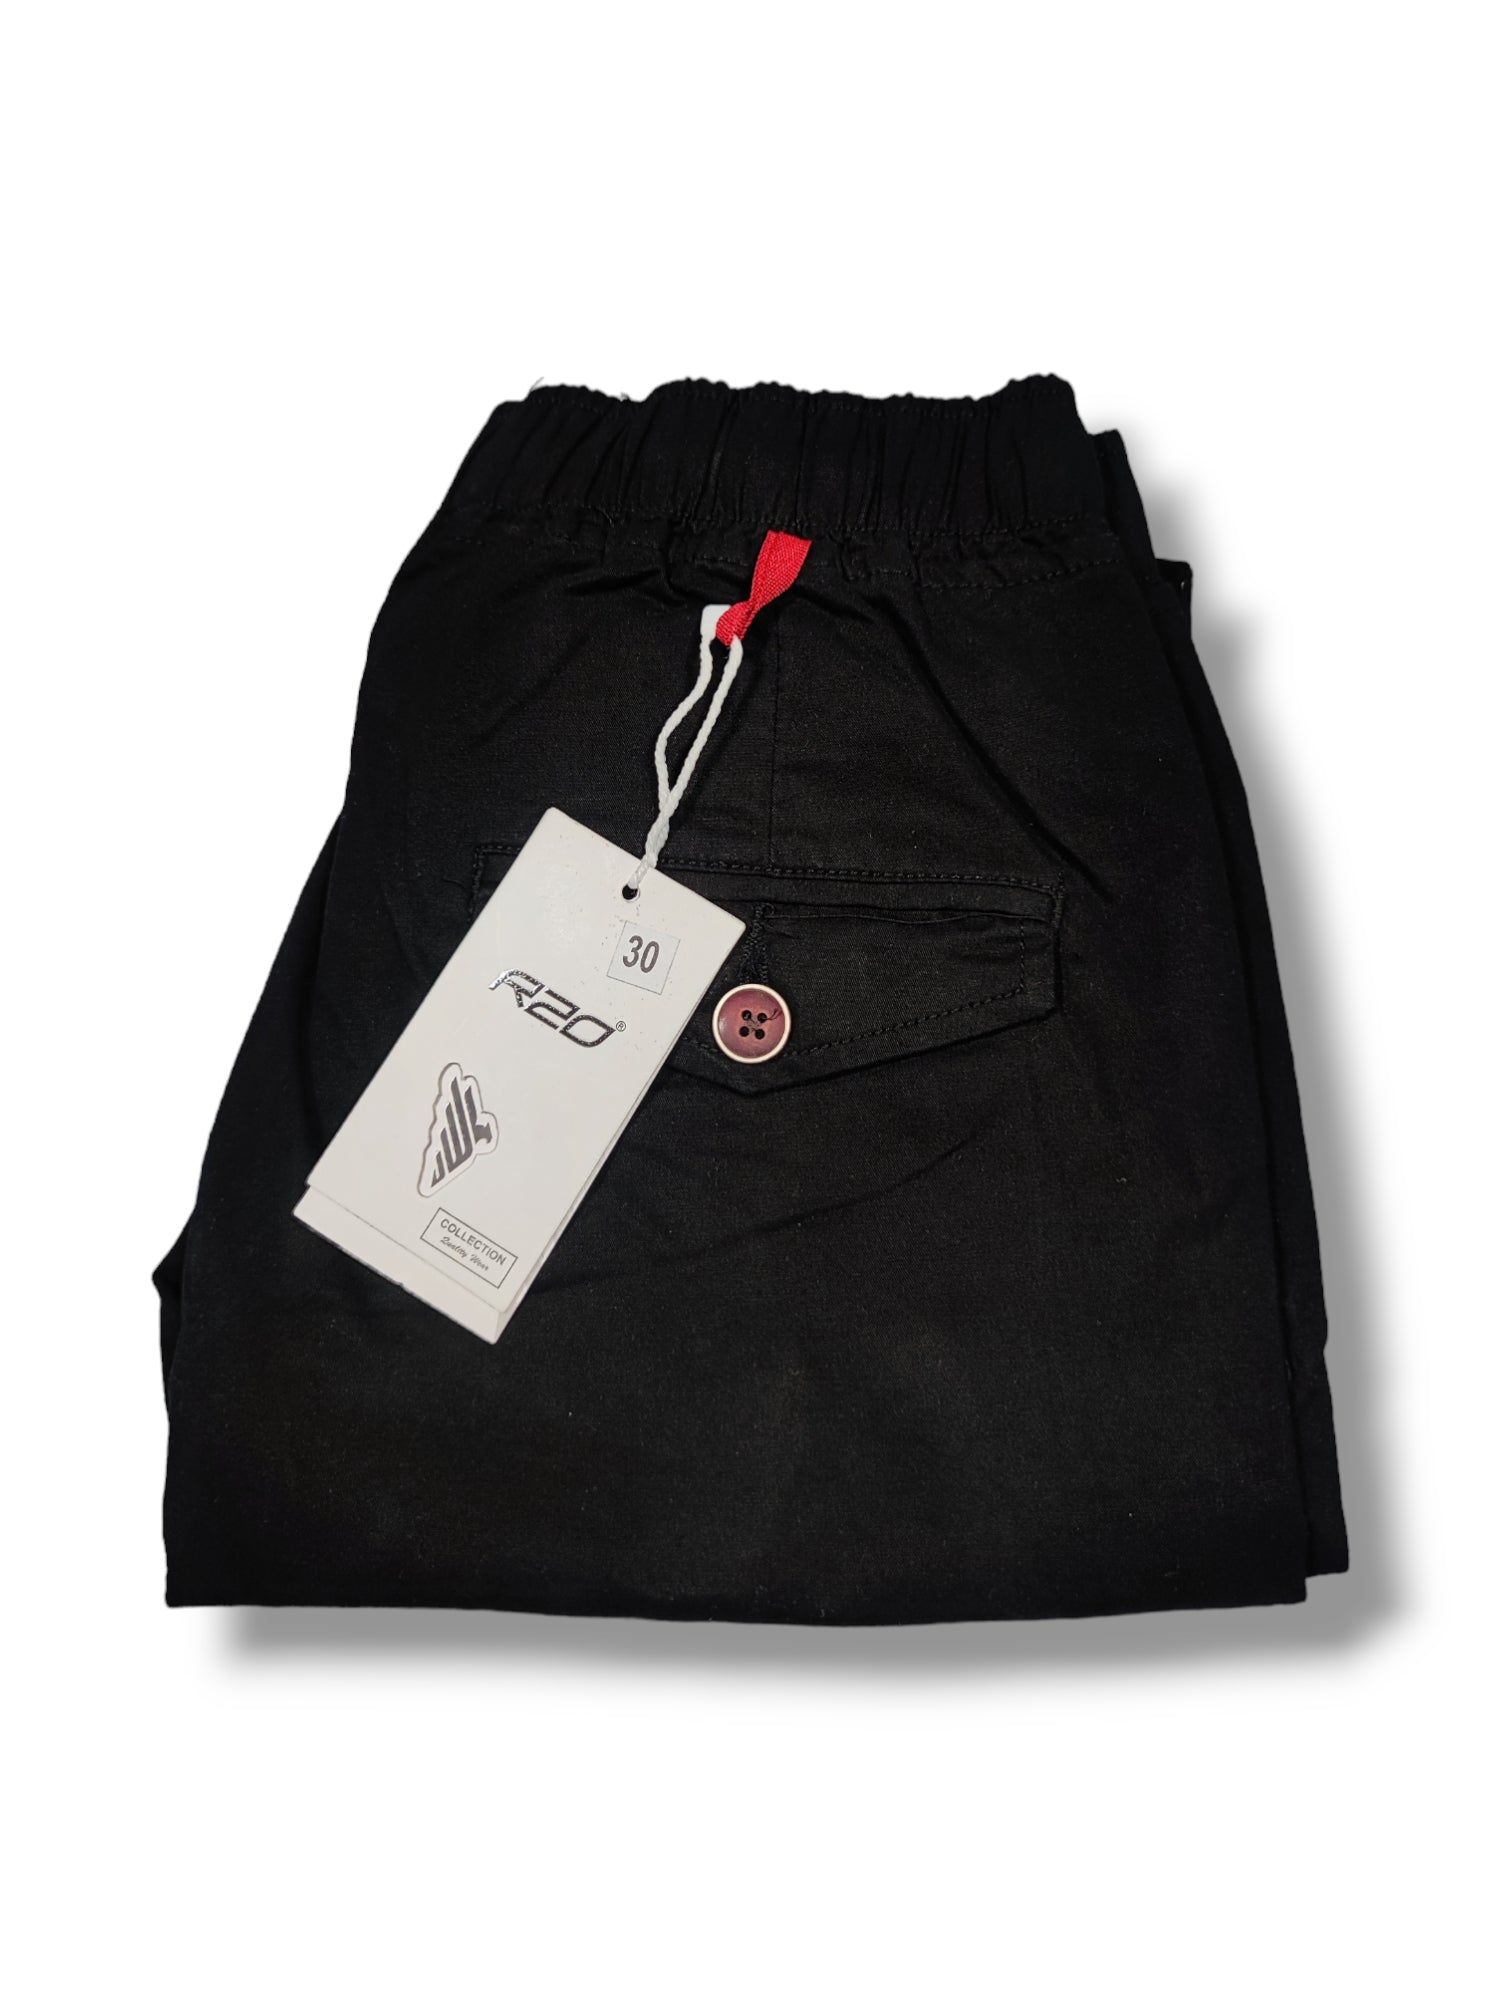 R20 Mens Black Cargo Pant, Jogger Pant With Bottom Cuff, 6 Pocket